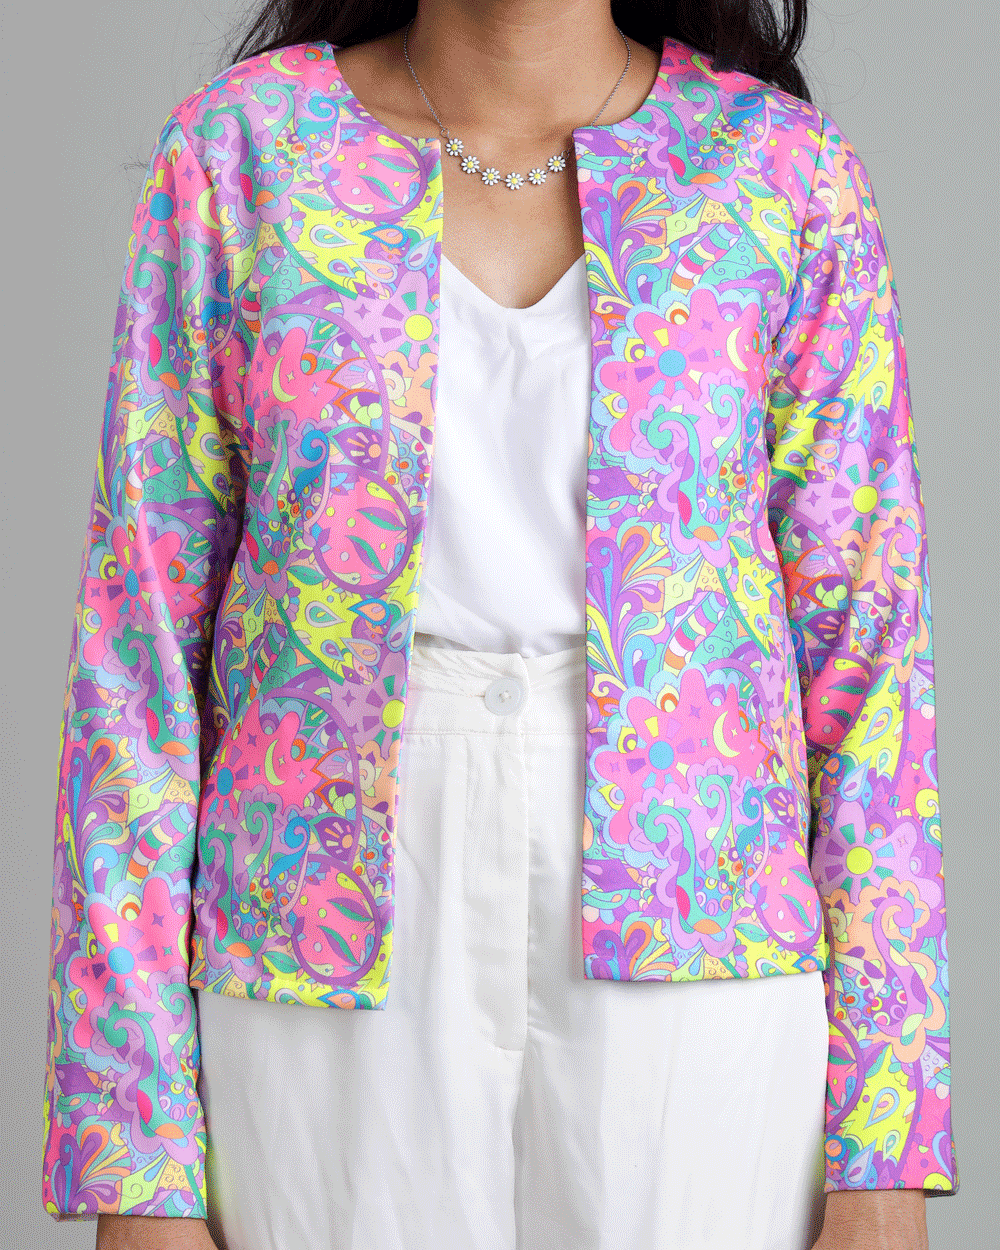 Unleash Your Inner Rockstar With This Neon Women's Jacket